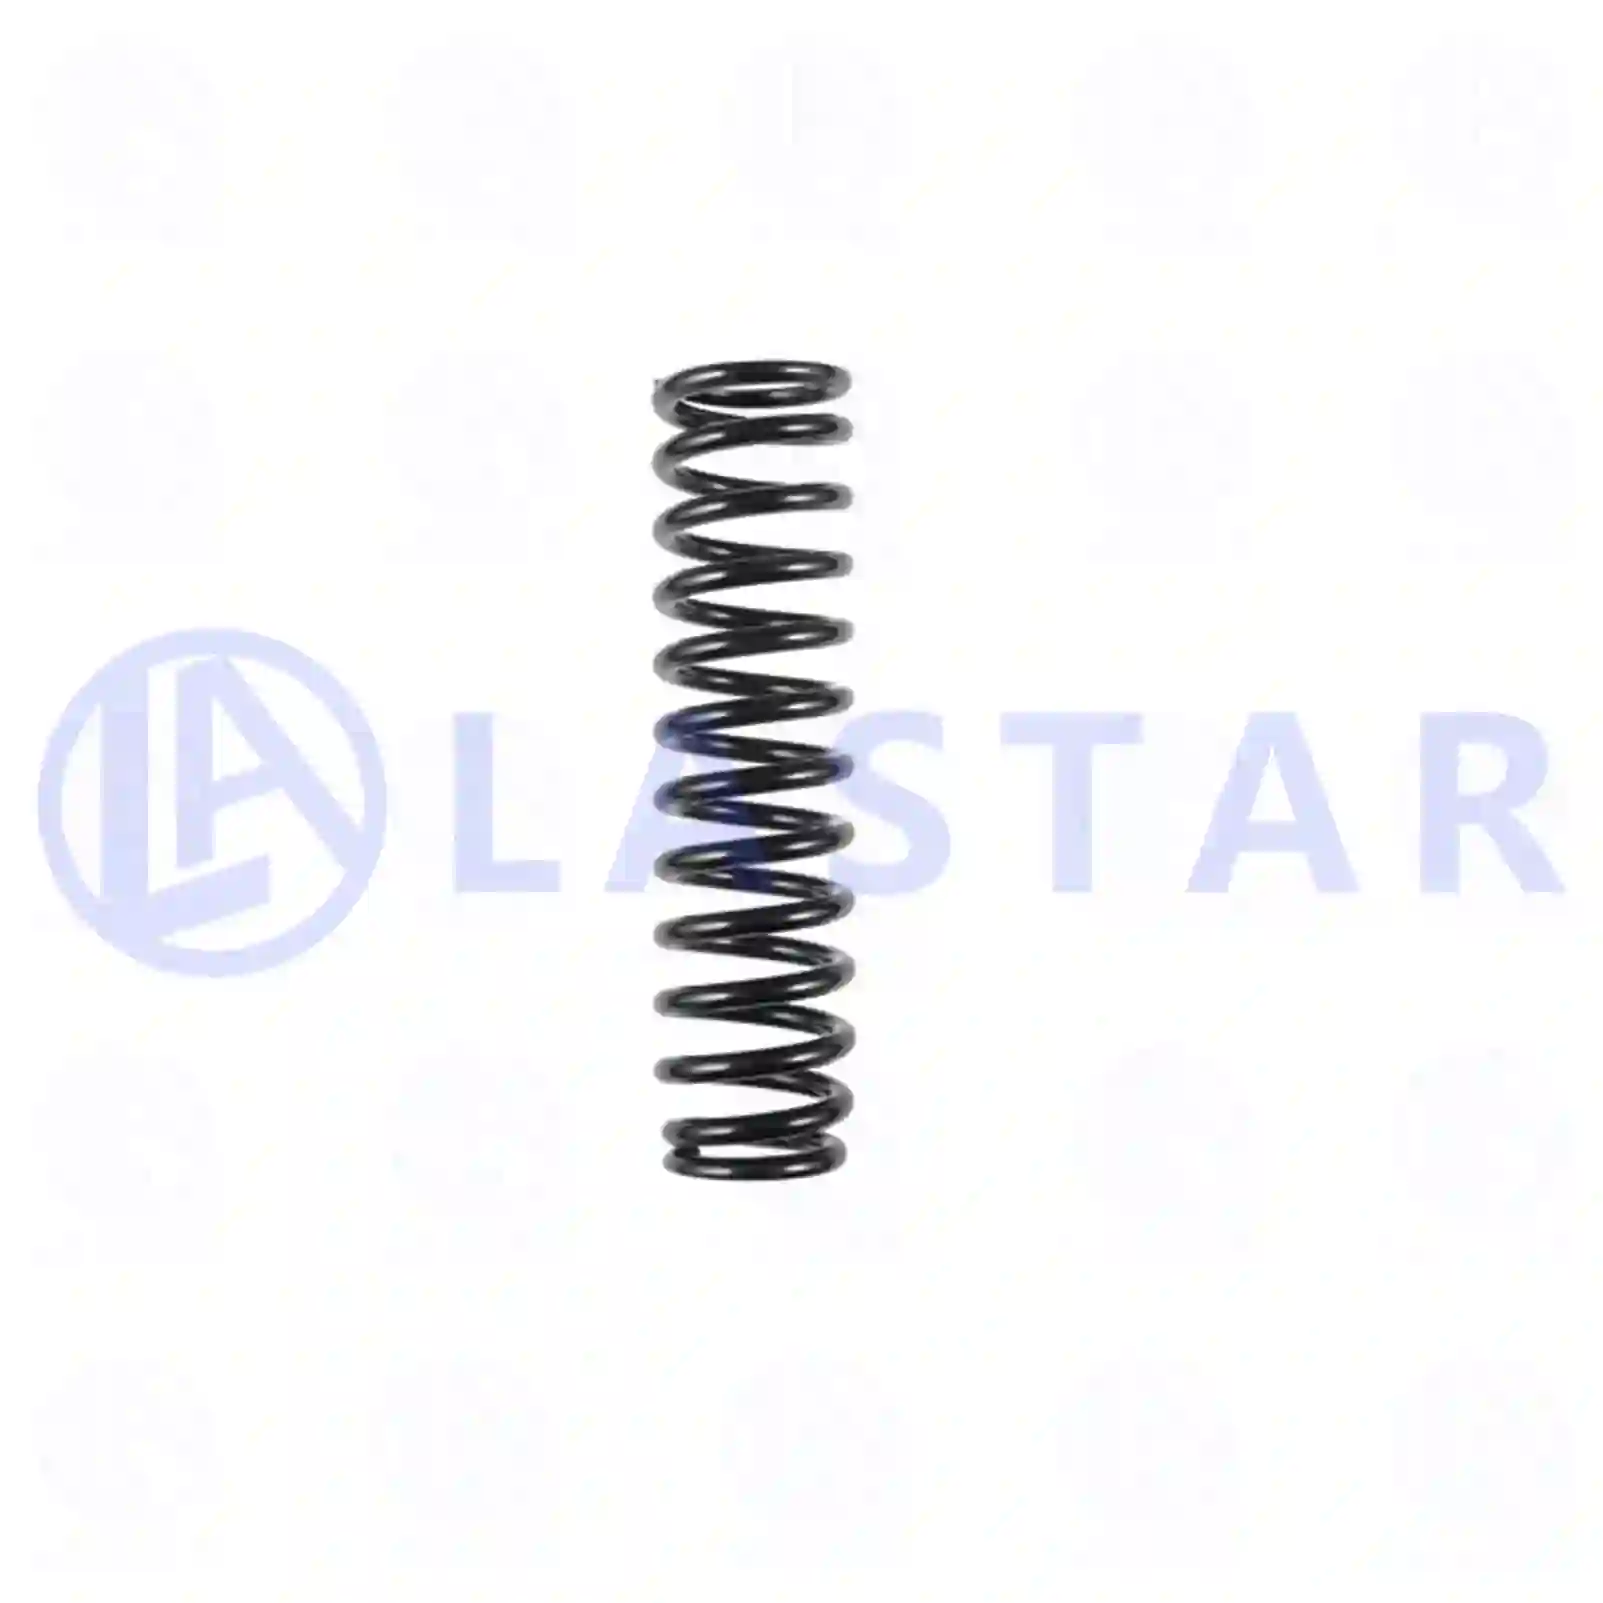 Spring, cabin shock absorber, 77736126, 1466175 ||  77736126 Lastar Spare Part | Truck Spare Parts, Auotomotive Spare Parts Spring, cabin shock absorber, 77736126, 1466175 ||  77736126 Lastar Spare Part | Truck Spare Parts, Auotomotive Spare Parts